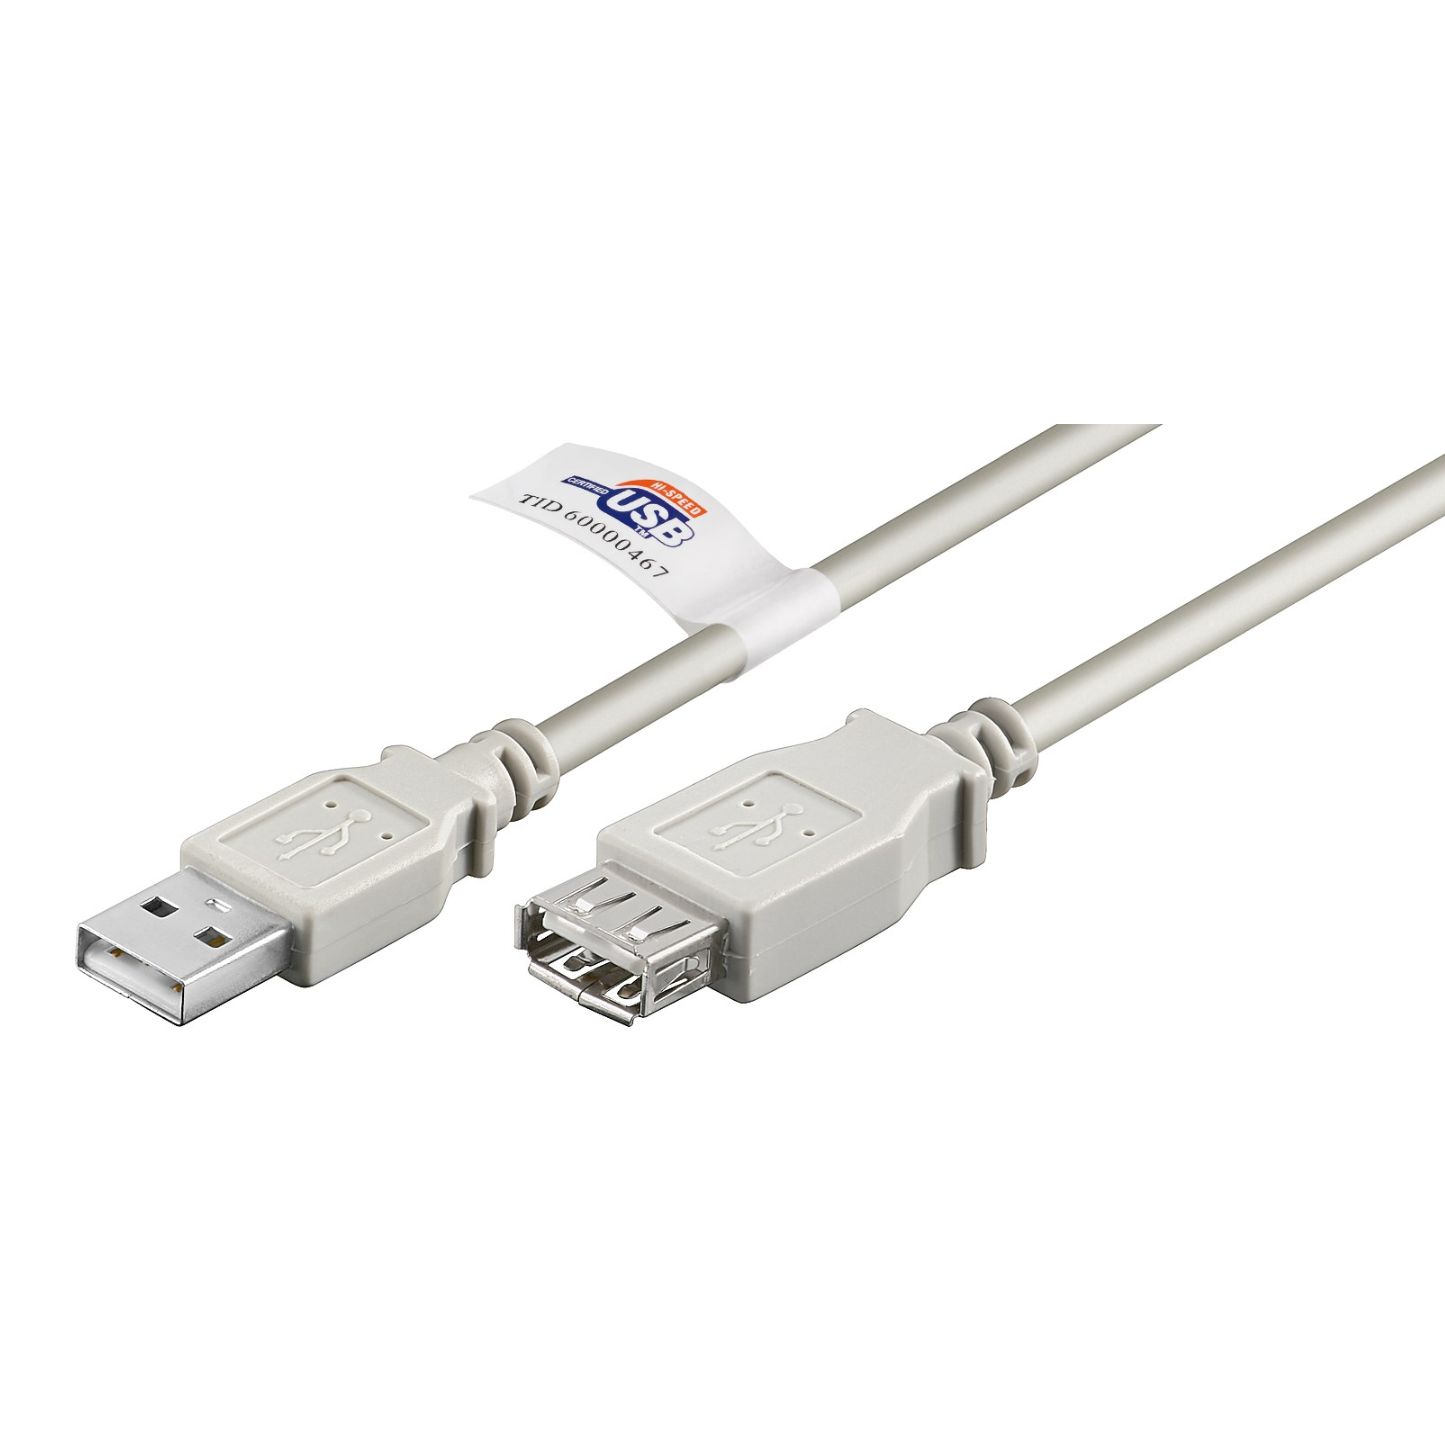 USB 2.0 extension cable AWG28-1P AWG24-2C grey certified 180cm